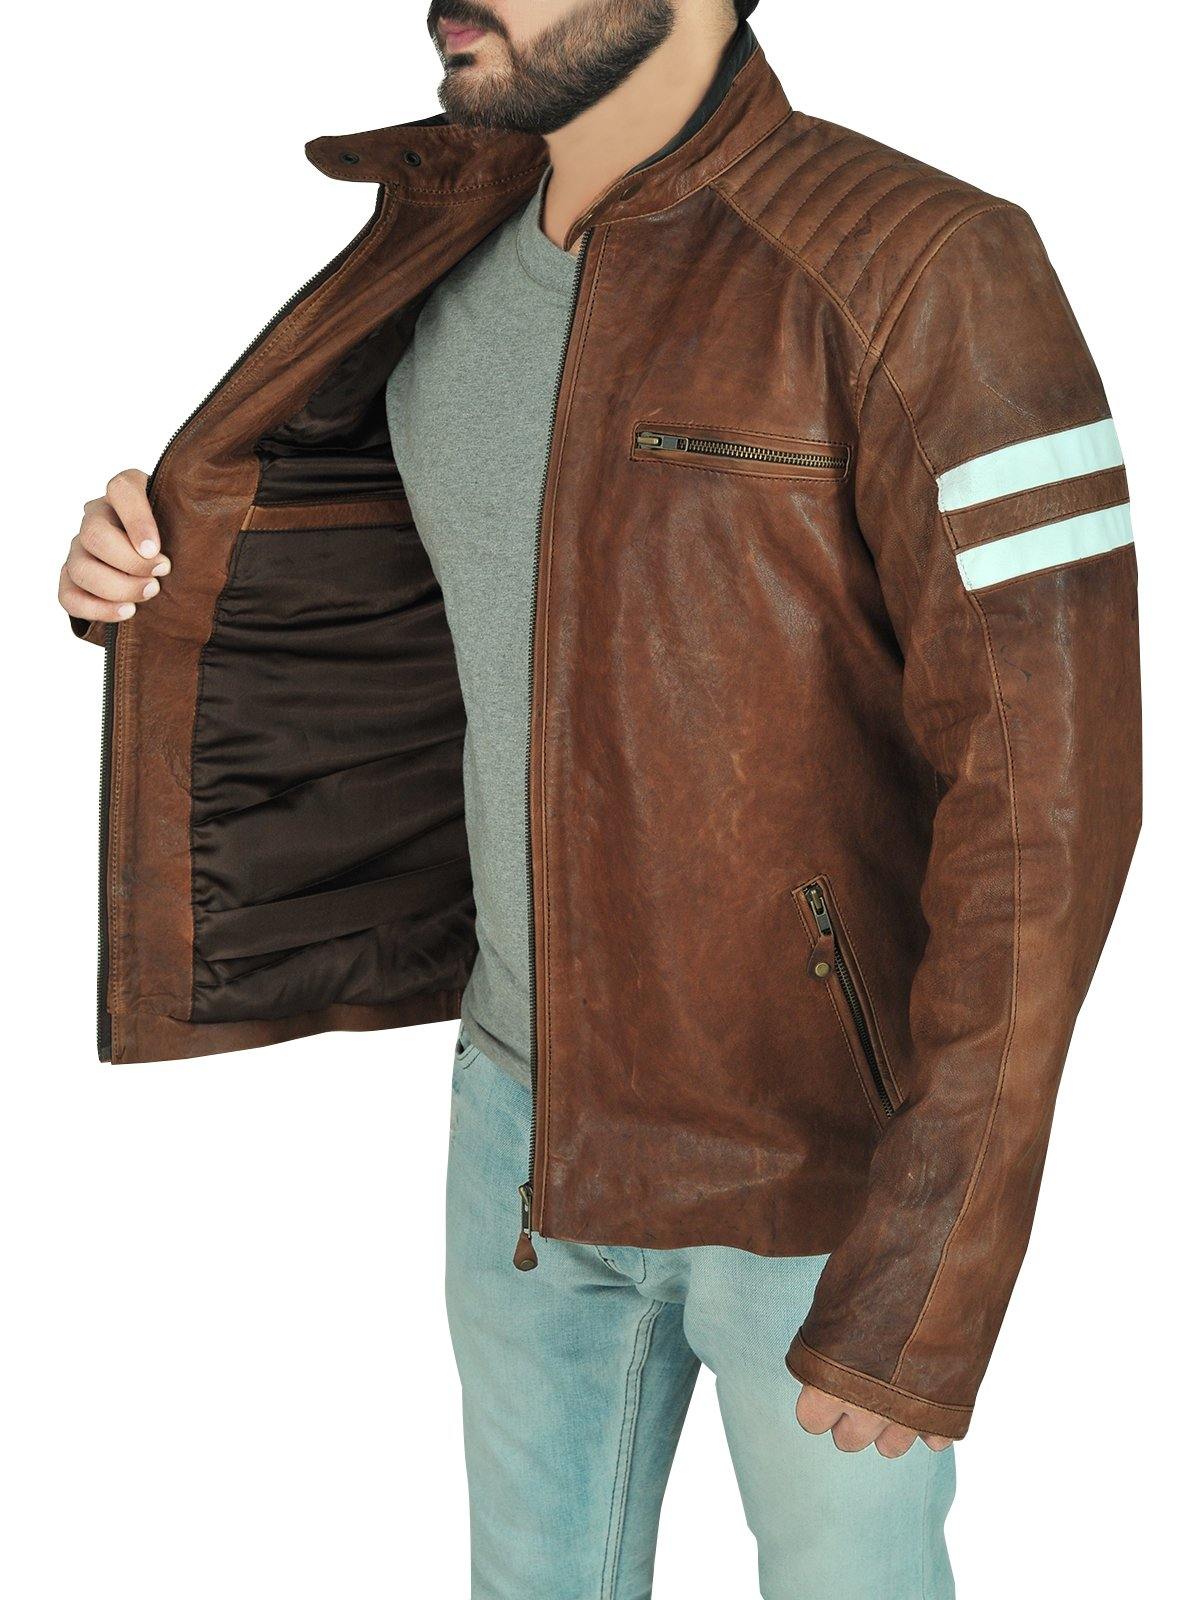 Classic Brown Leather Biker Jacket - Wiseleather